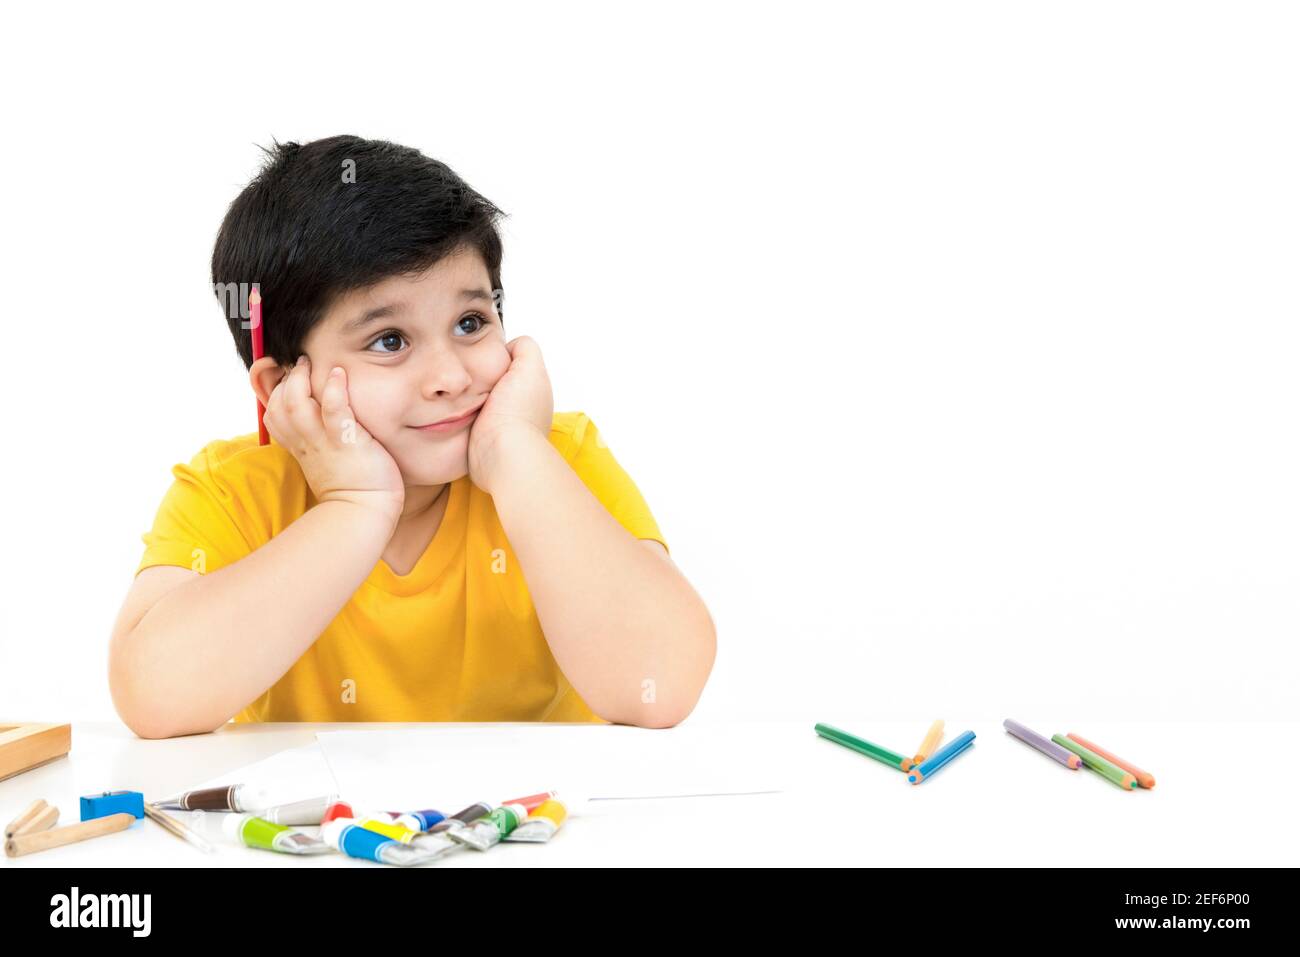 Cute little boy thinking of what to draw and paint - learning, education and imagination concepts Stock Photo